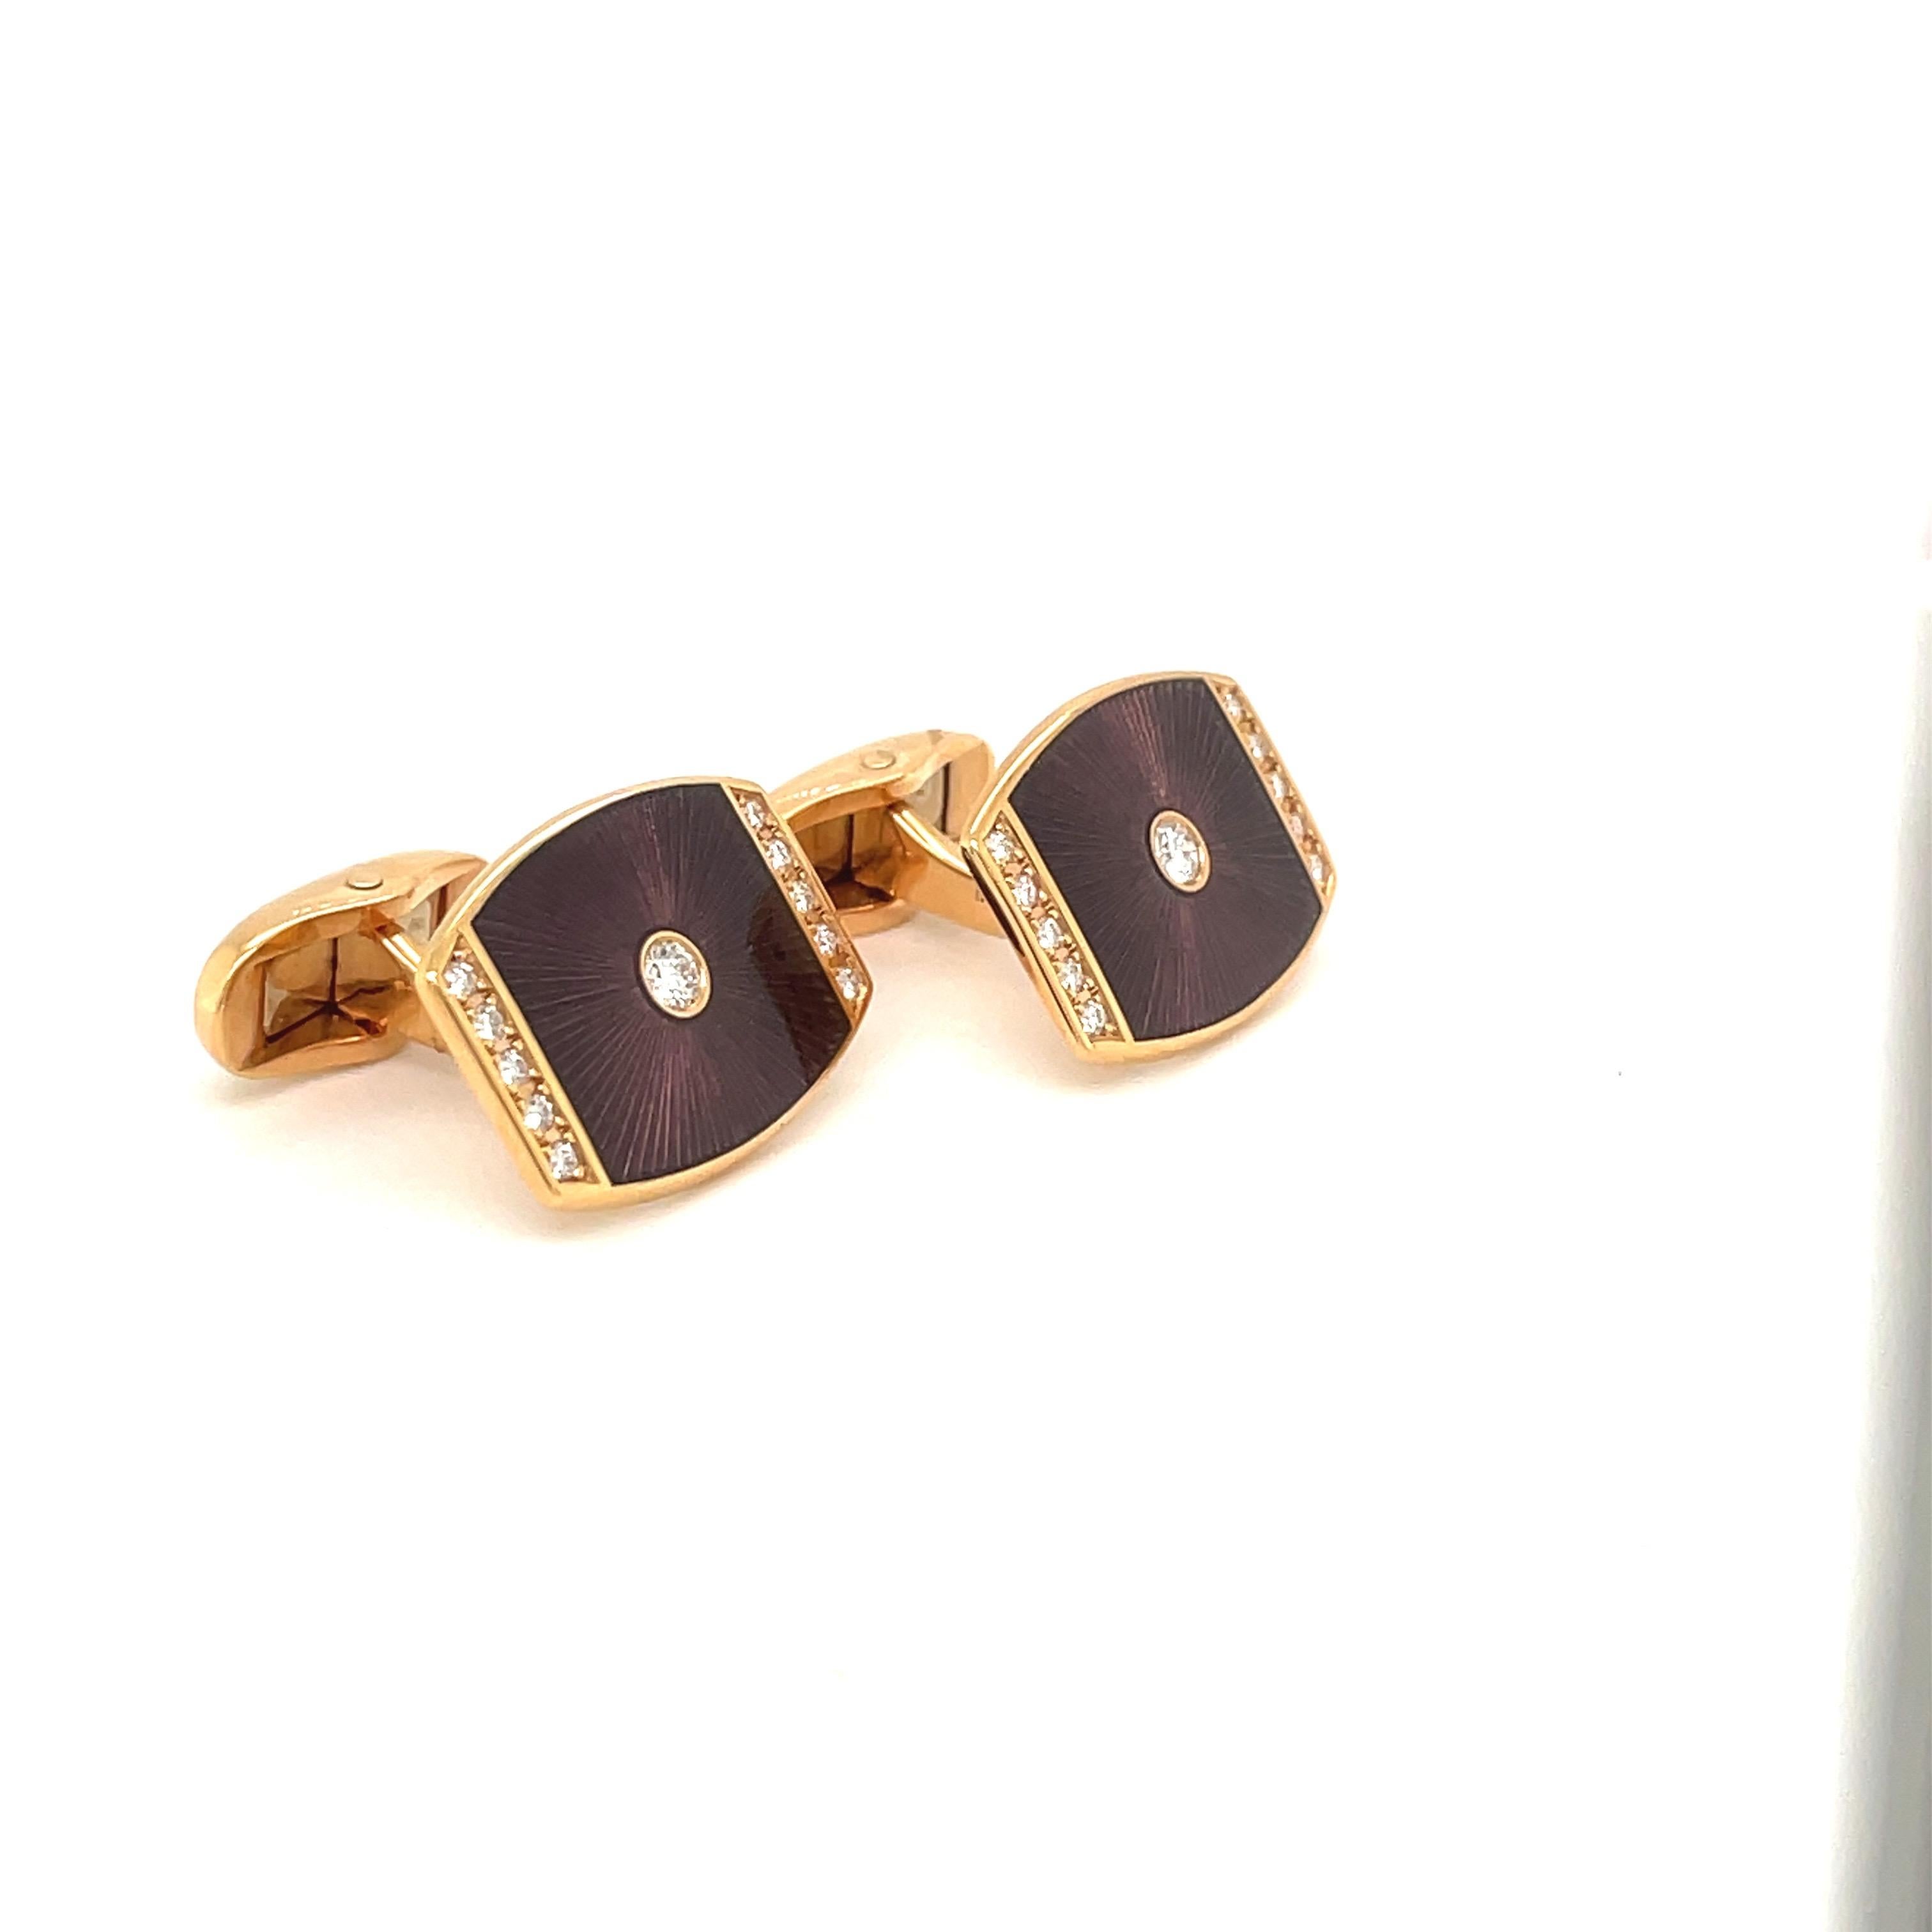 Faberge 18kt Rose Gold Enamel and Diamond 0.32ct Cuff Links #135/1000 In New Condition For Sale In New York, NY